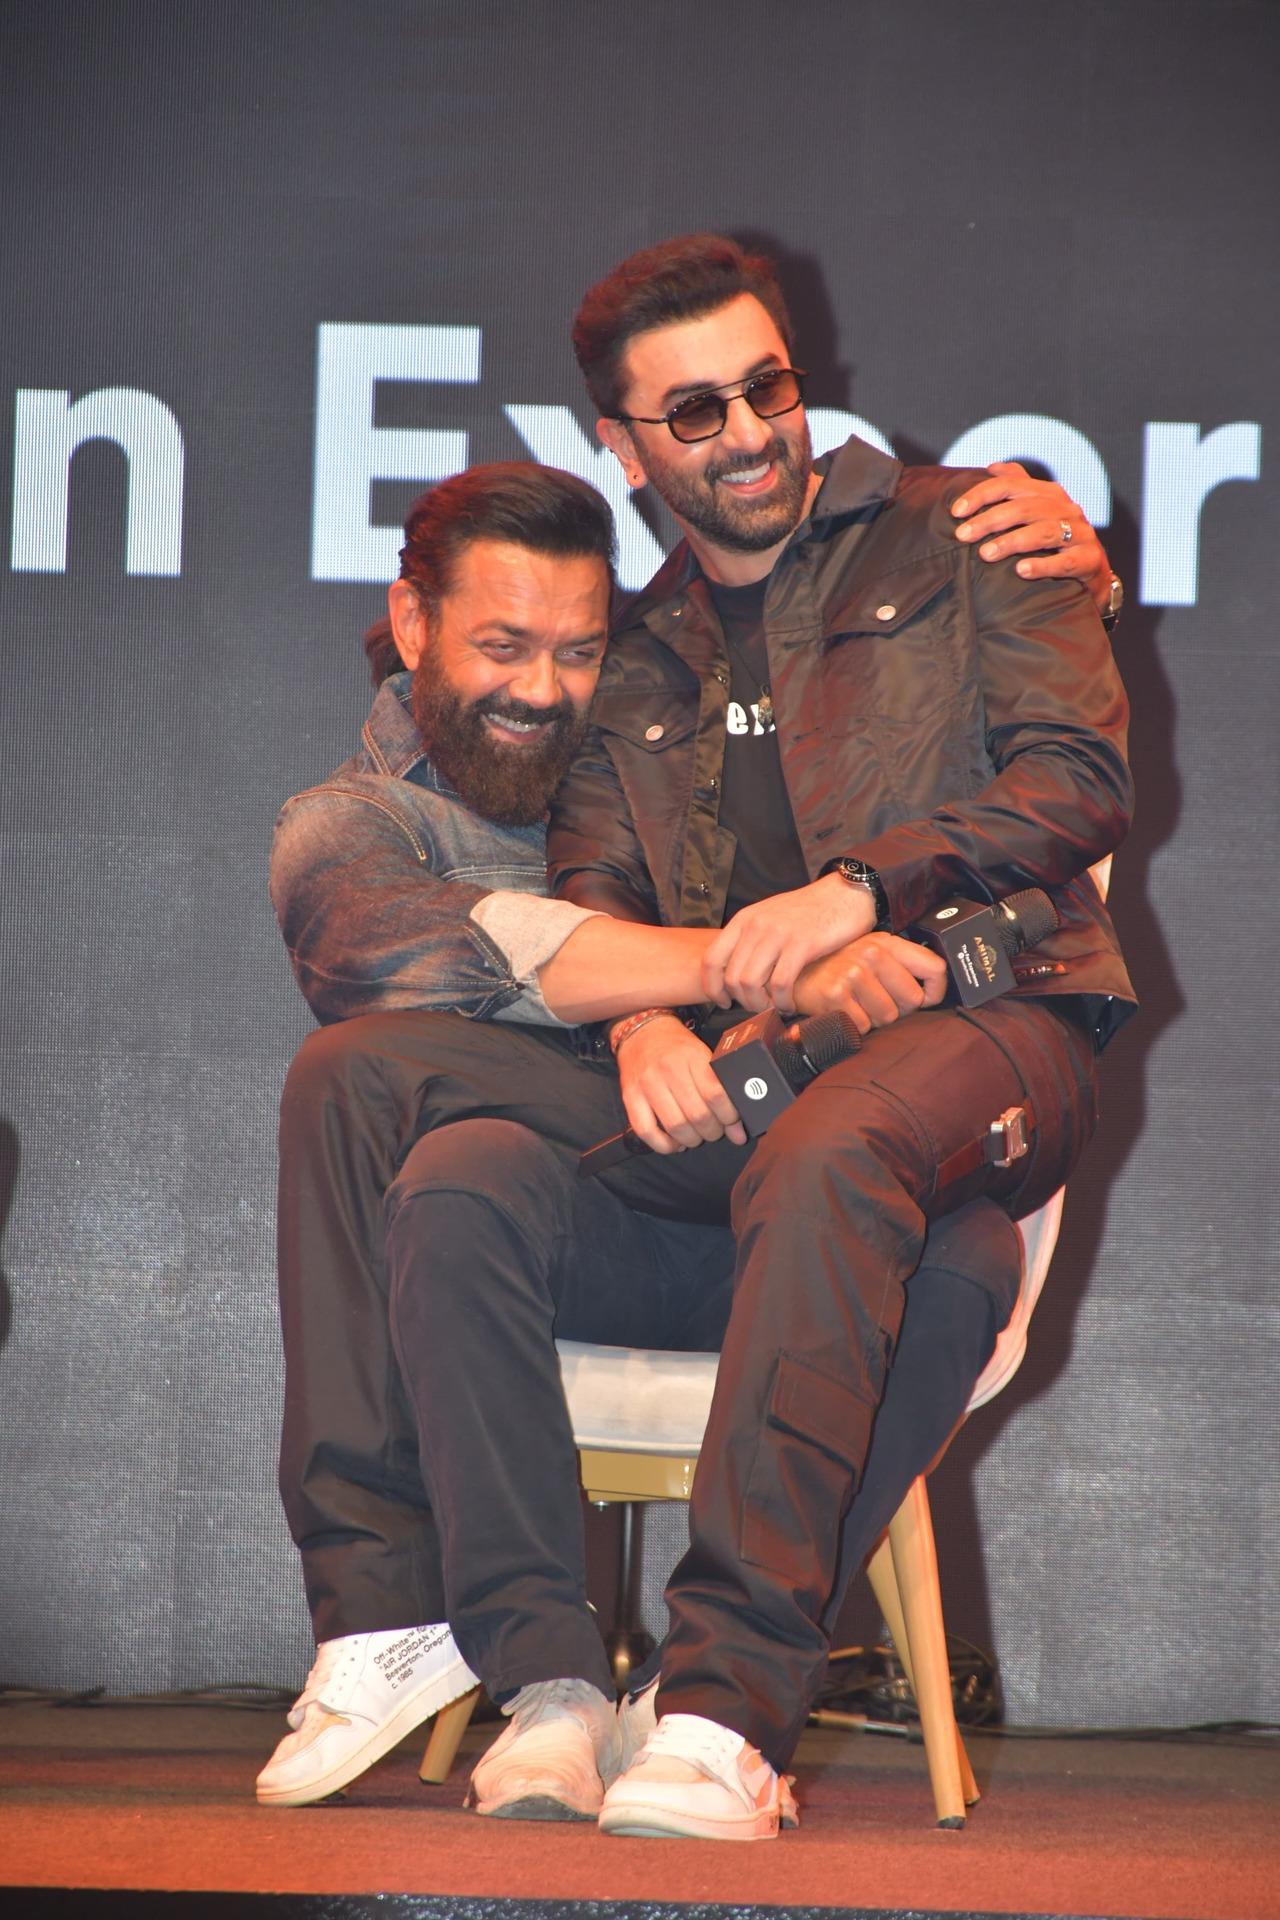 Ranbir and Bobby's bromance was one of the highlights of the event